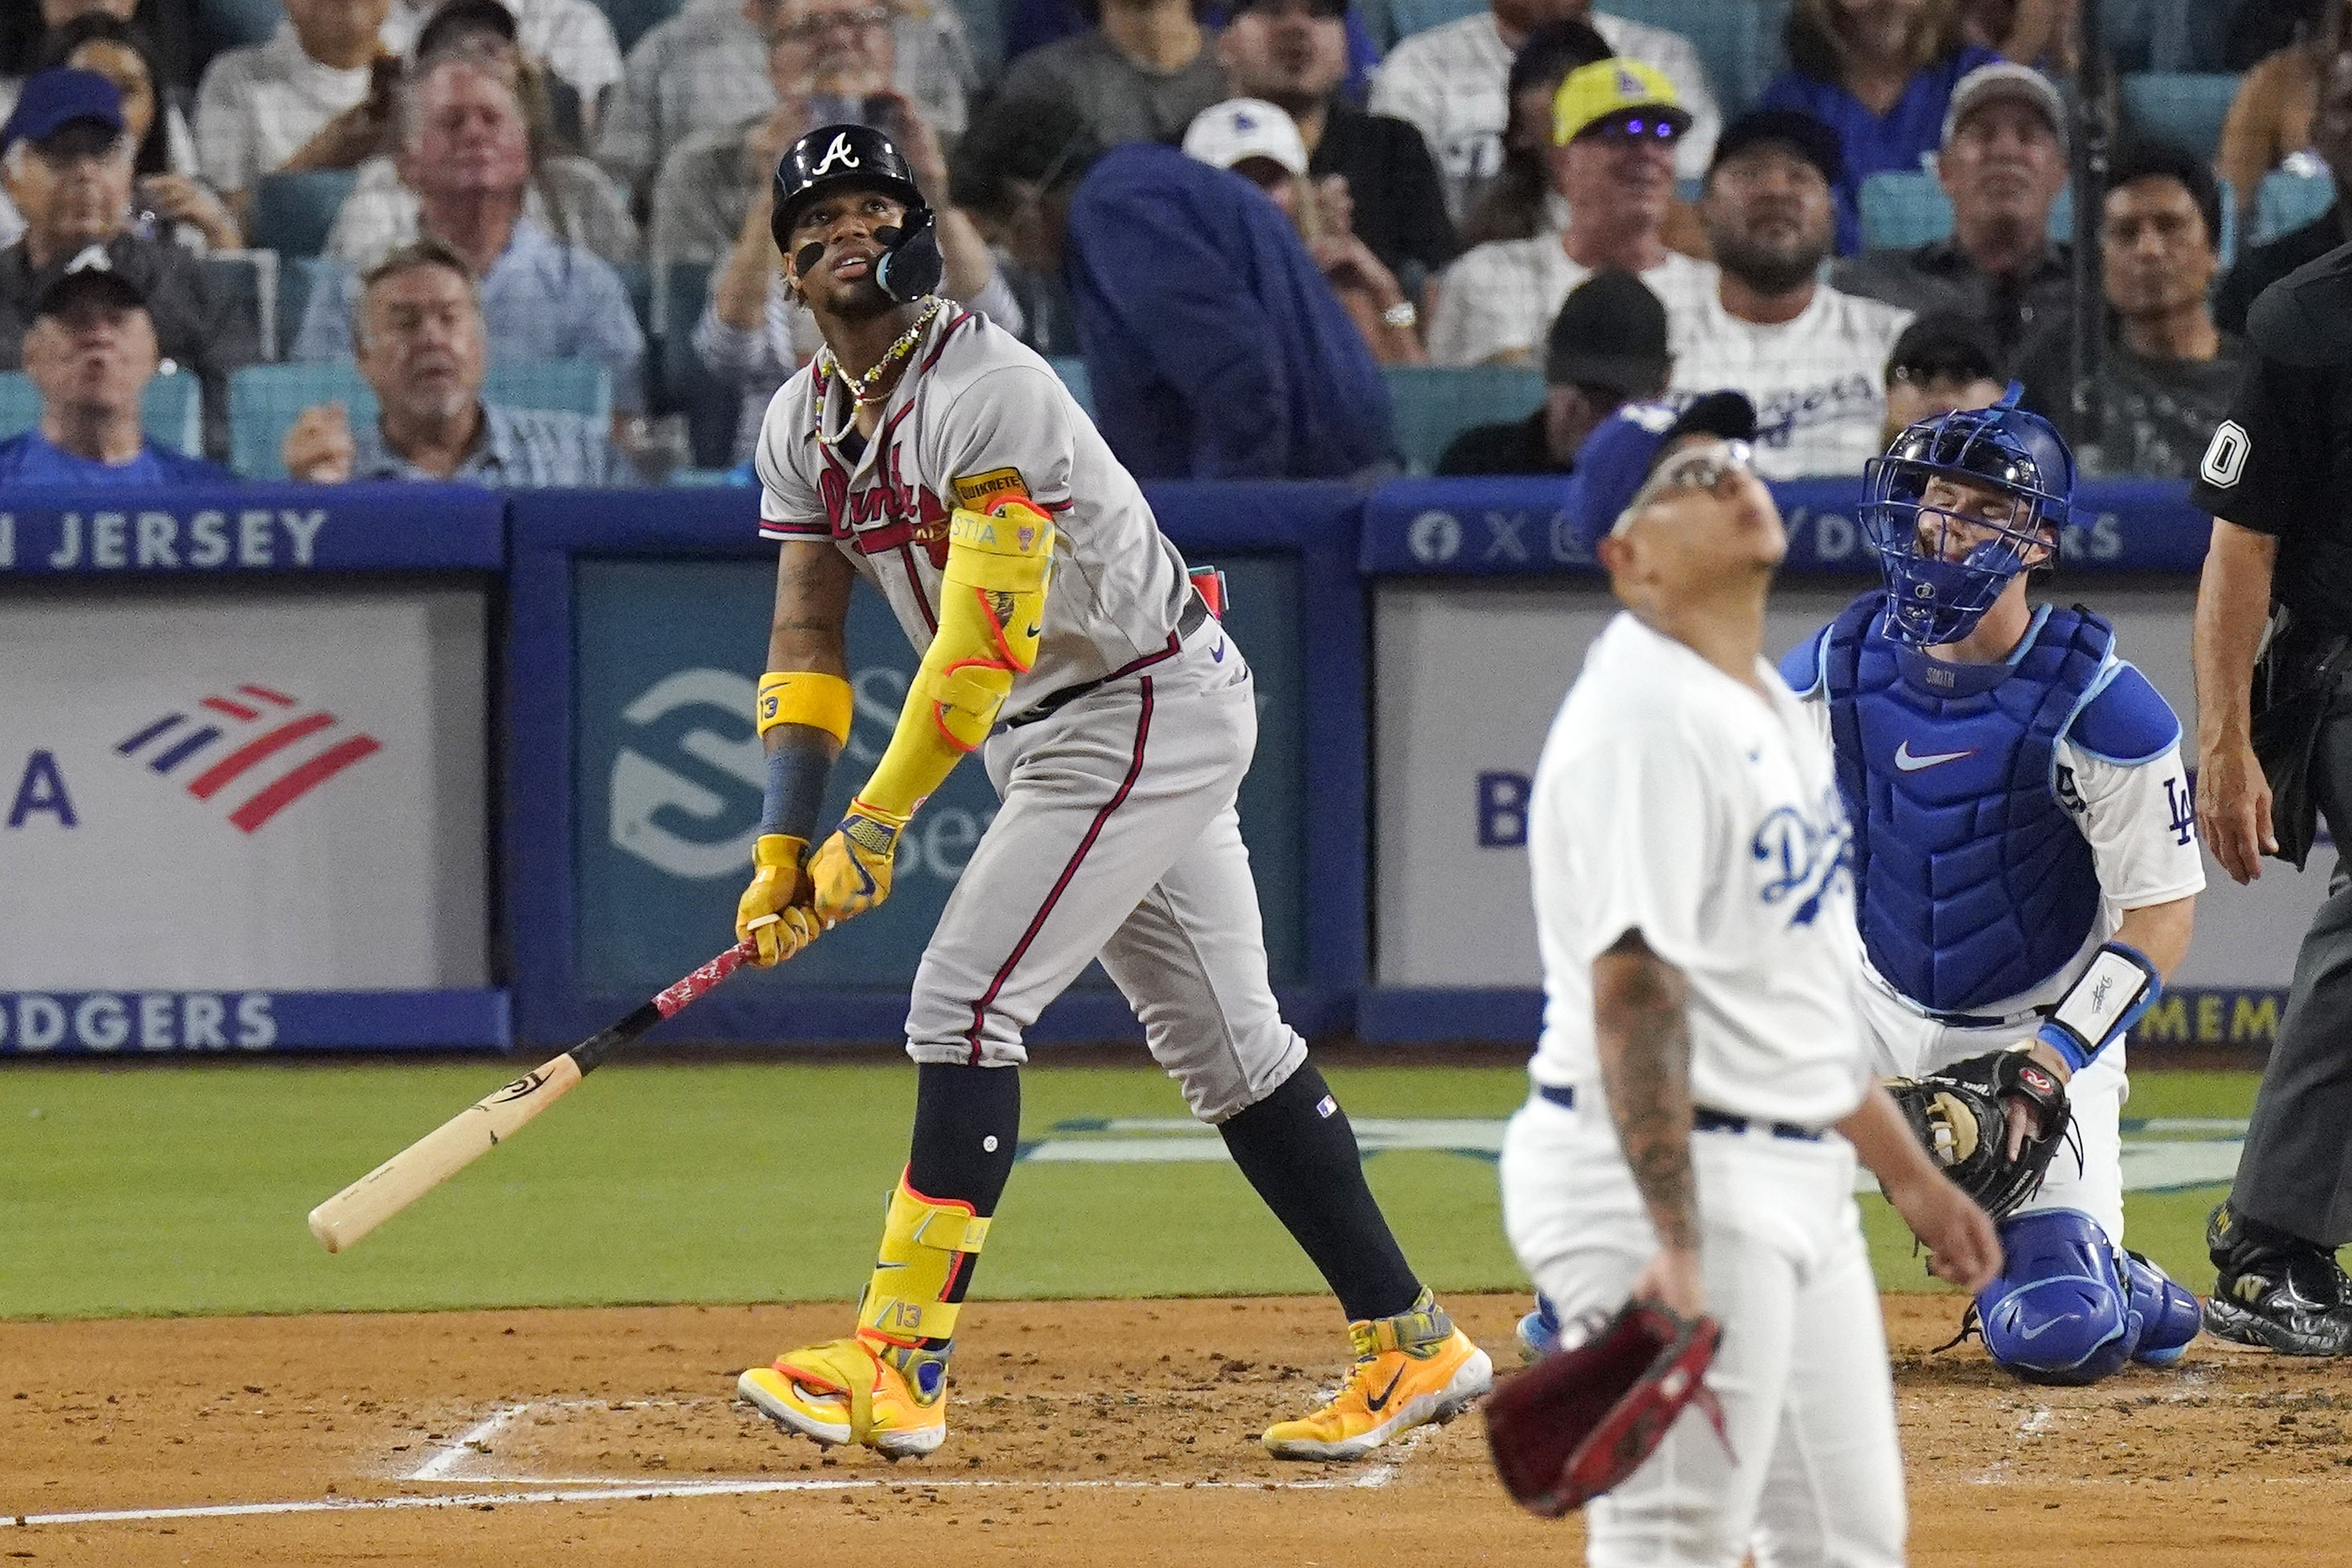 The last two times Eddie Rosario's family has been at a game, he's hit  three home runs